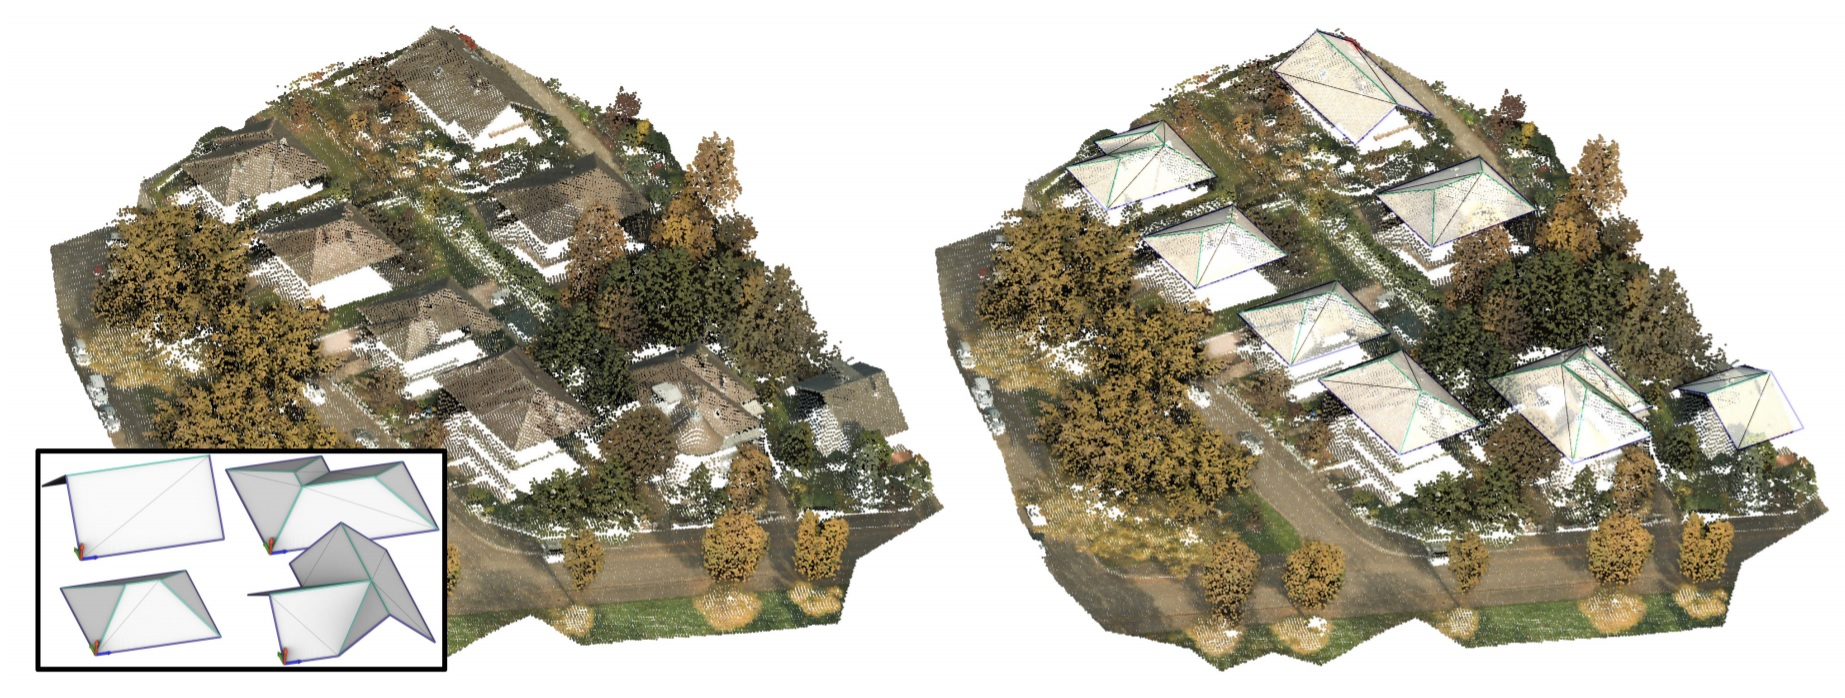 Left: Example of roofs and airborne LIDAR cloud models. Right: We are interested in fitting the user-defined models to the corresponding point cloud.